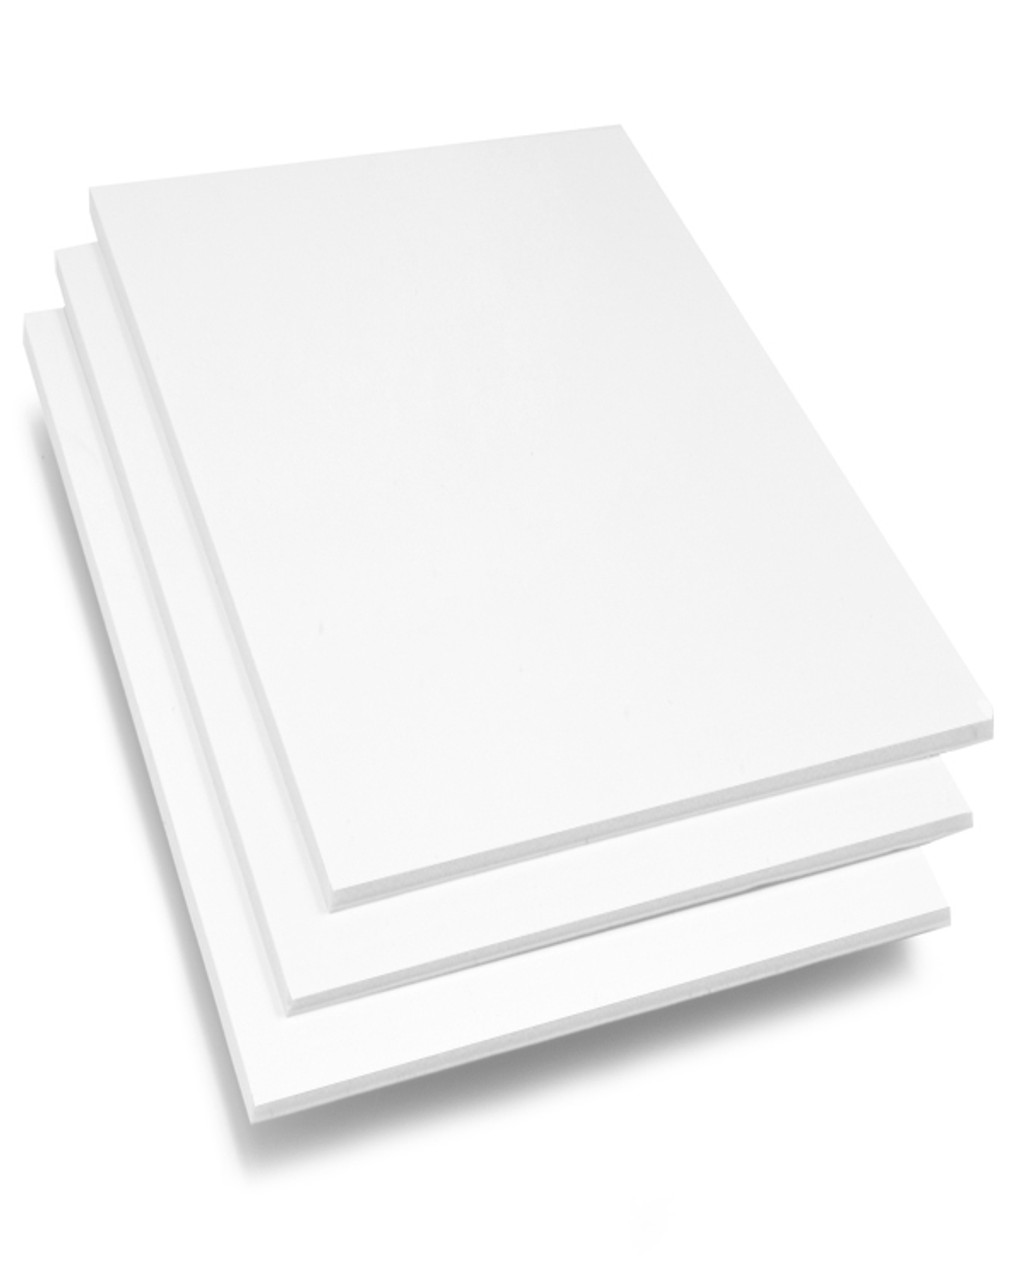 FVIEXE 16Pack 11.7 x 16.5 Inch Foam Board, 5MM Thick Foam Core Boards White  Poster Board, Acid Free, Rigid, Craft Foam Board Sheets for Mounting,  Modelling, Art, Display, Presentation, School Projects - Yahoo Shopping